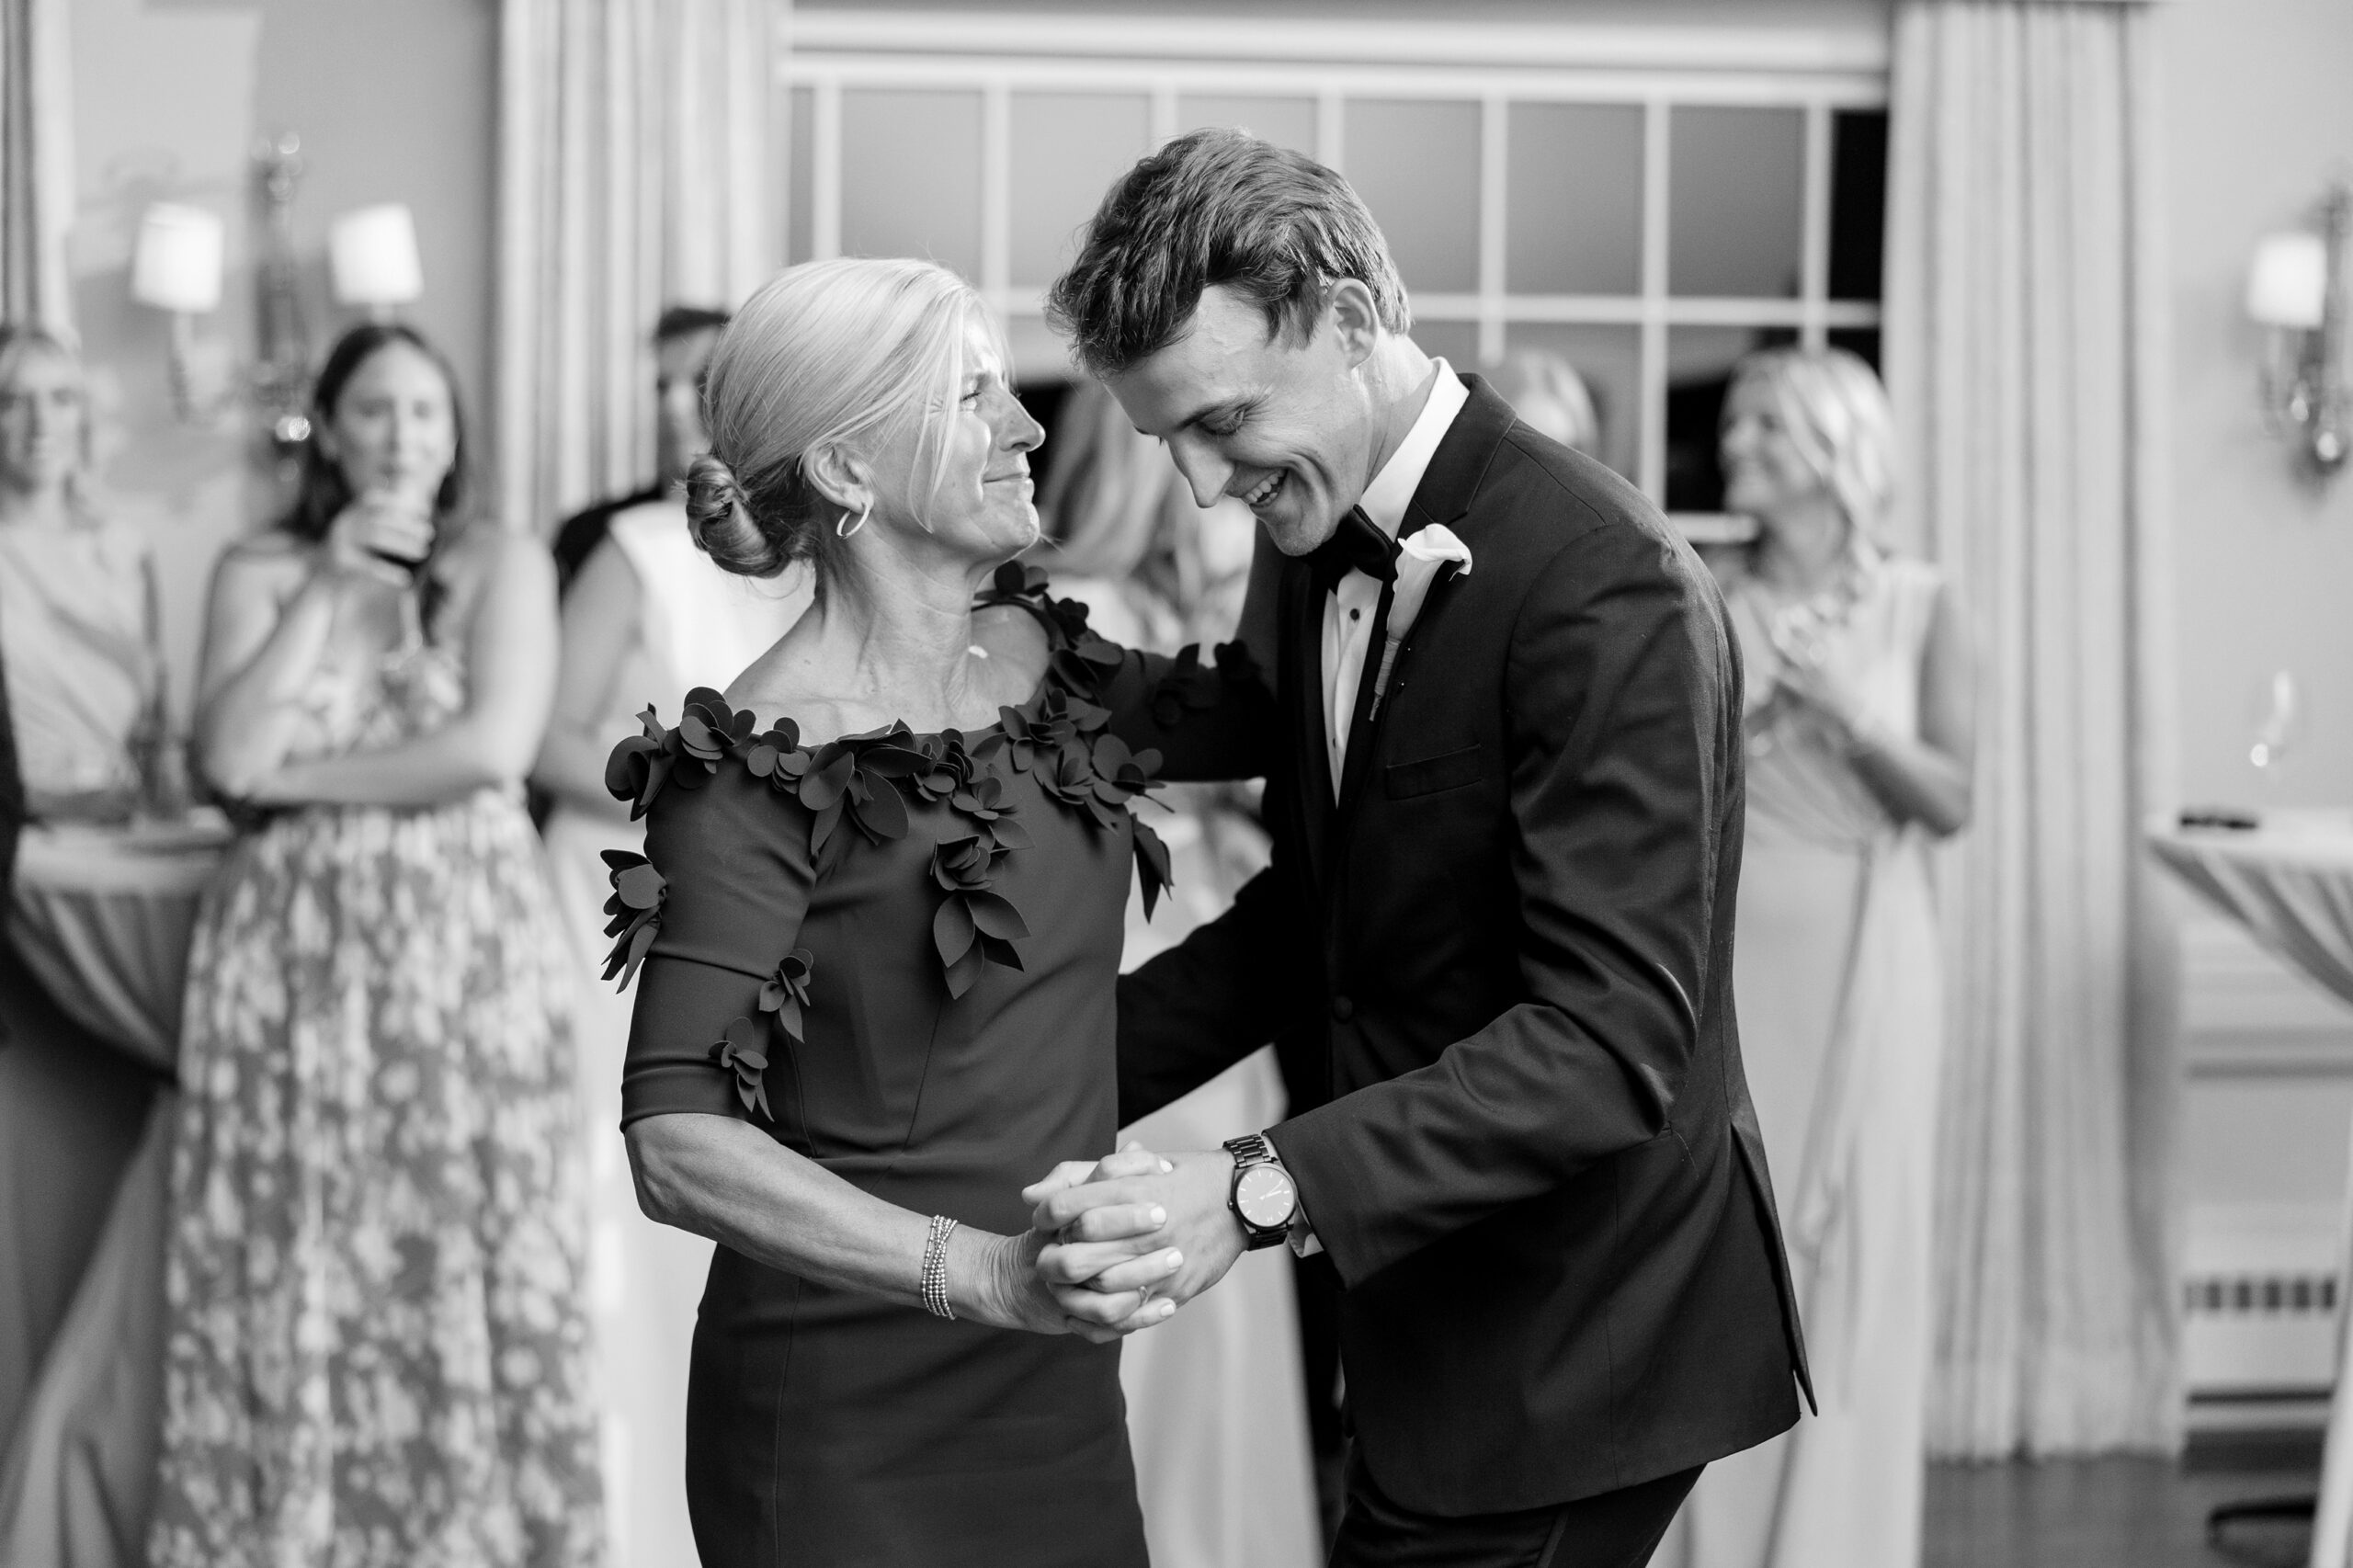 The groom and his mother danced at the Westmoreland Country Club wedding reception